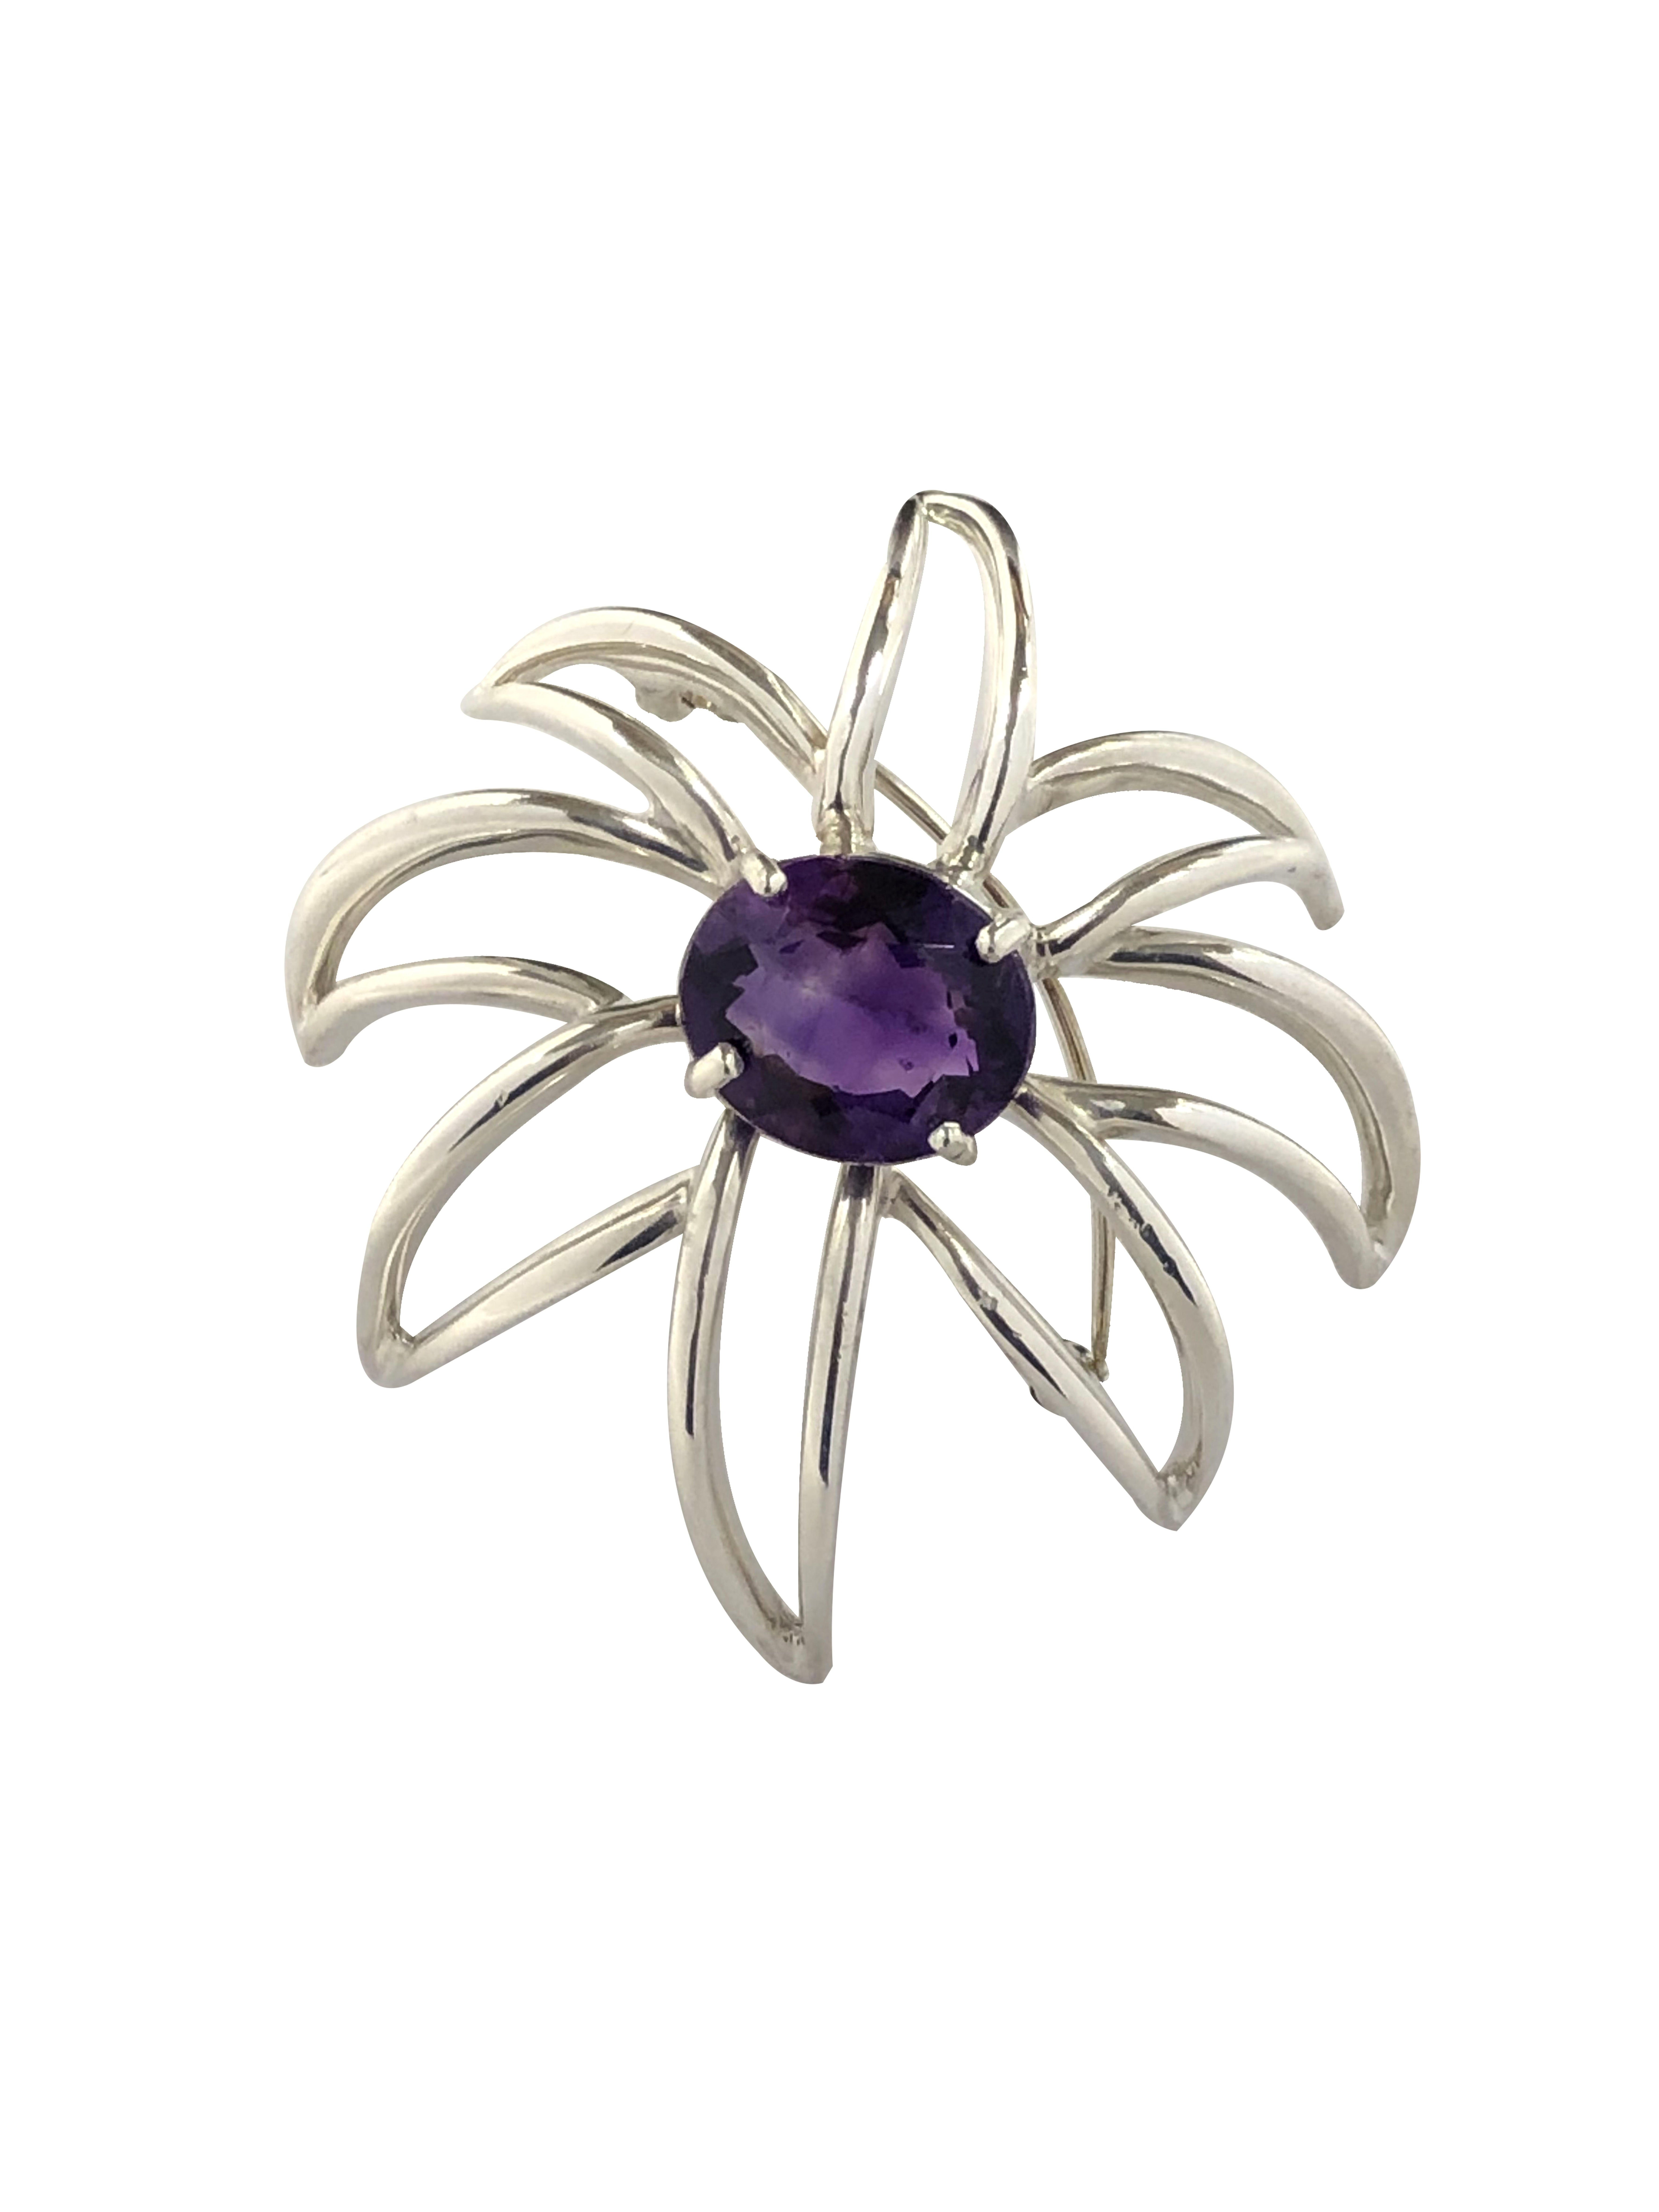 Circa 1990s Tiffany 7 Company Fireworks collection Sterling Silver Brooch. Measuring 2 Inches in Diameter and centrally set with an oval Amethyst approximately 3 Carats. 